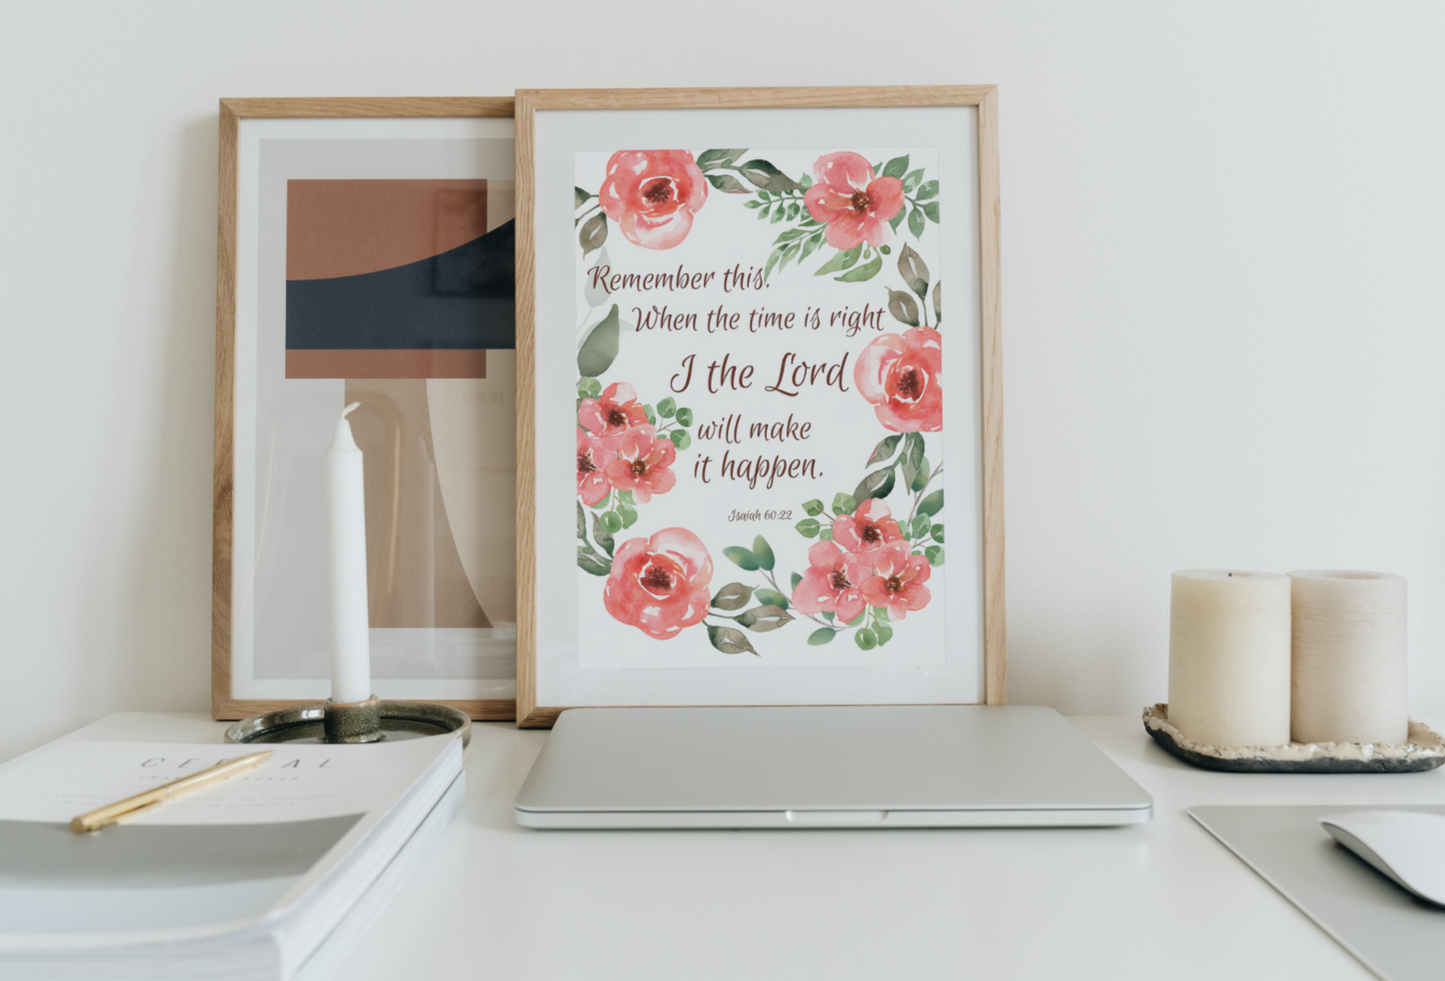 When the Time is right, I the Lord will Make it Happen Physical Print - Catholic Wall Art